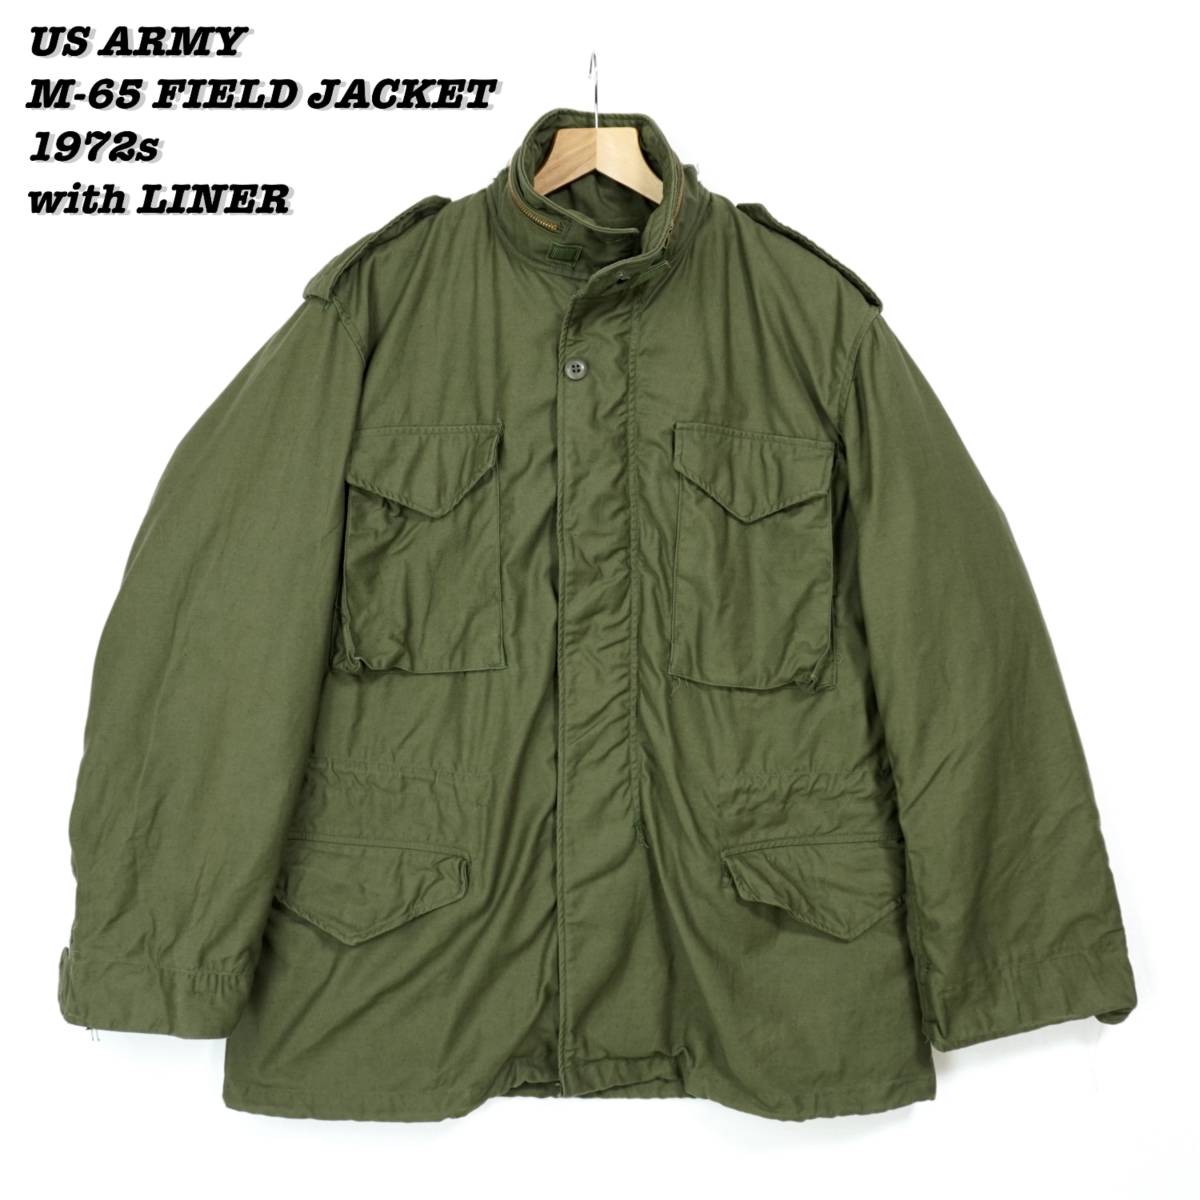 US ARMY M-65 FIELD JACKET with LINER 304153 1970s Vintage アメリカ